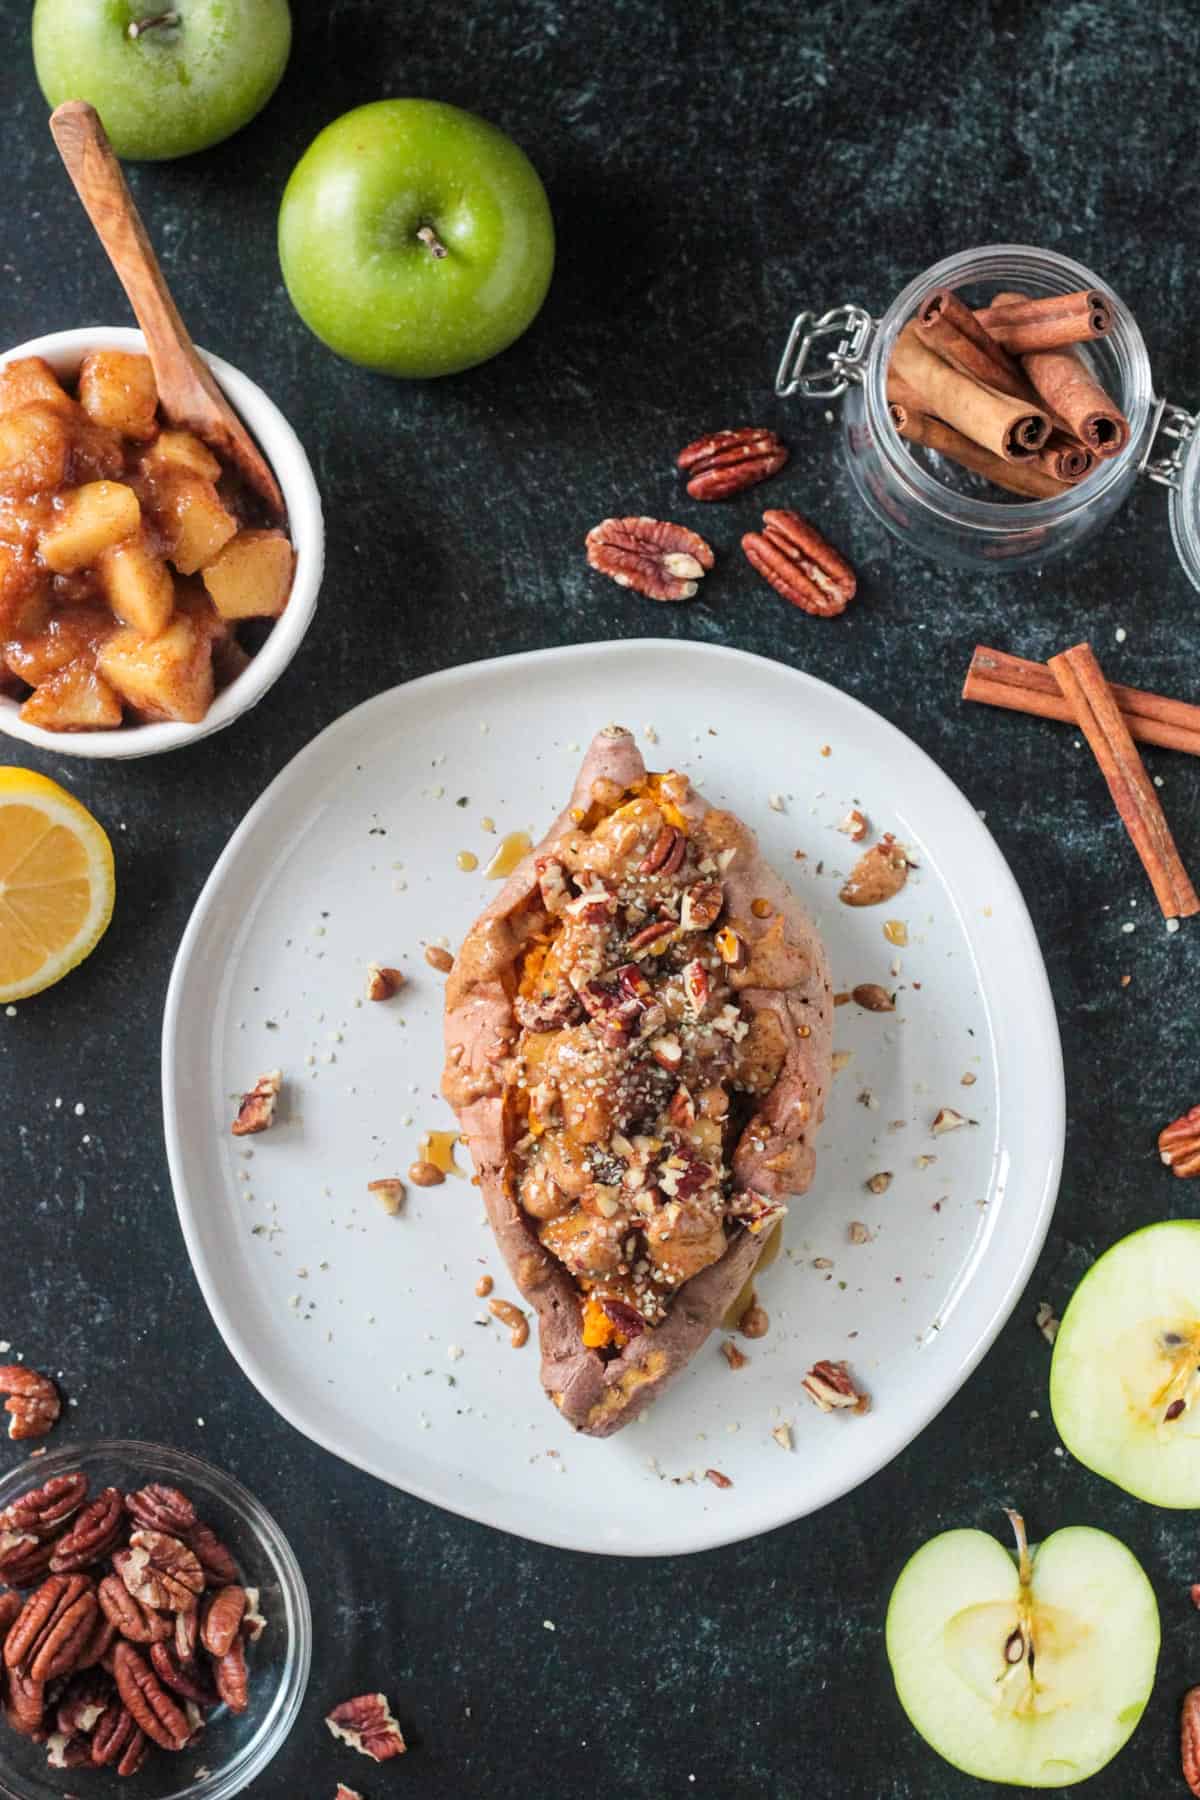 Finished recipe with sweet apple topping, nut butter, and chopped nuts.